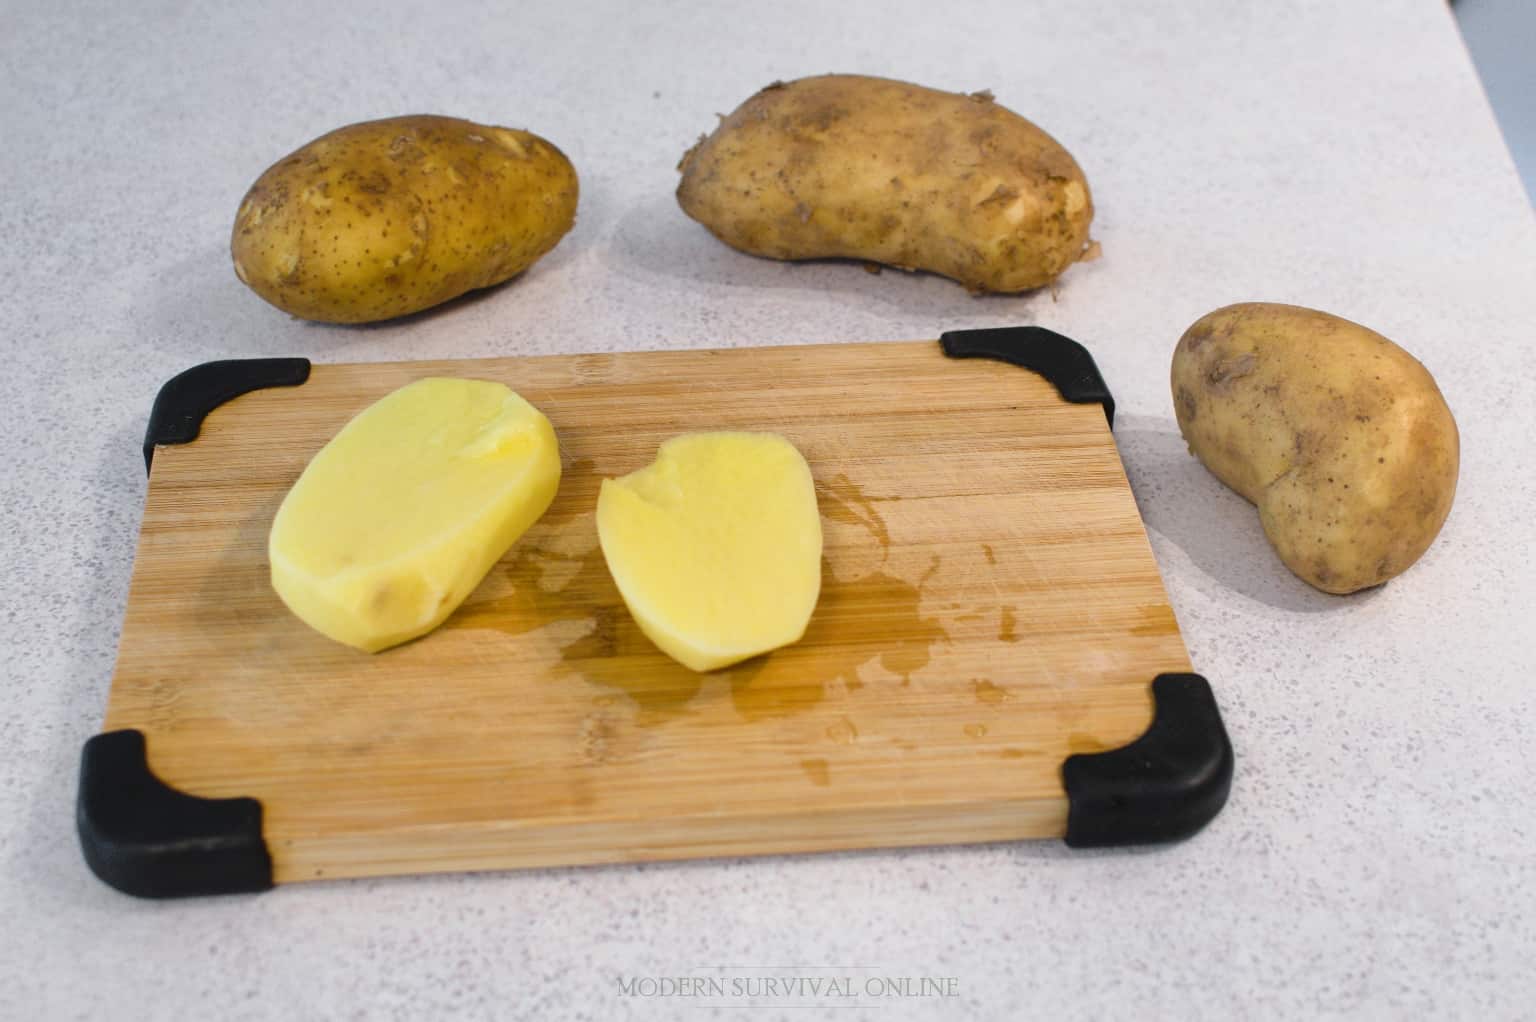 sliced raw potato on cutting board next to other potatoes